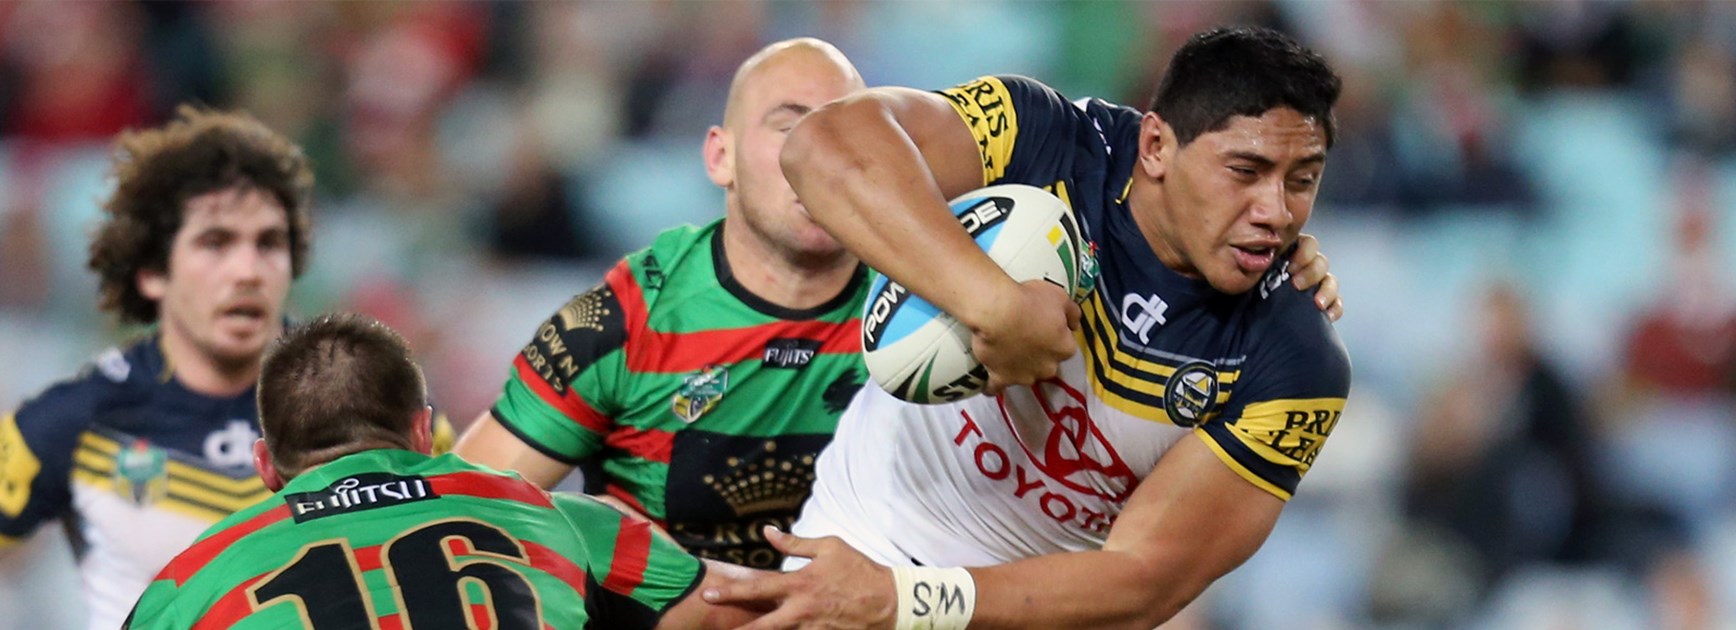 The Cowboys will face the Rabbitohs in Thursday night football in Round 23.